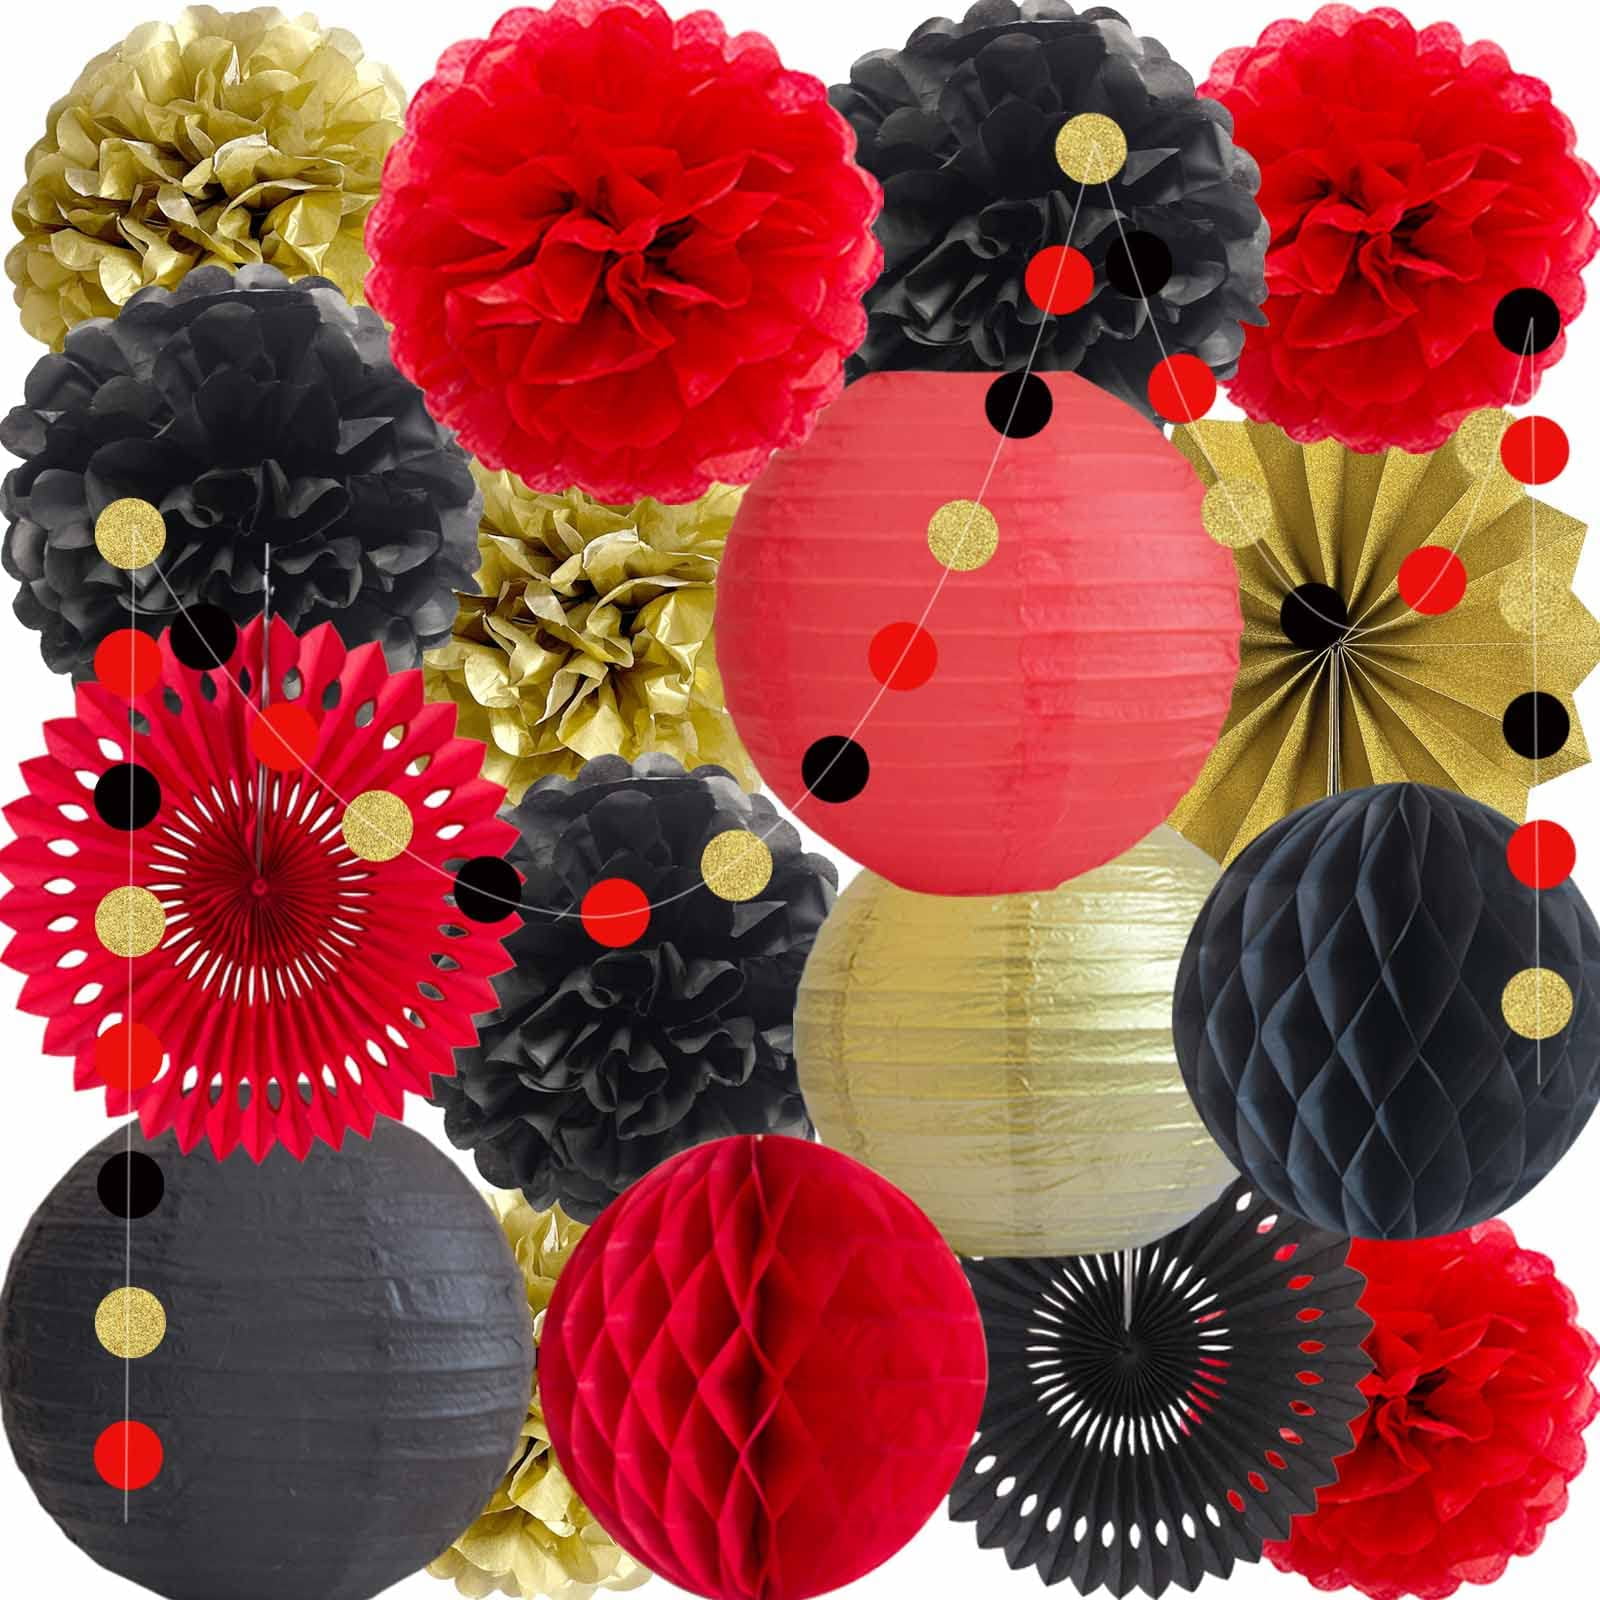 MRMSLI 10pcs 10inch red yellow black party decorations tissue